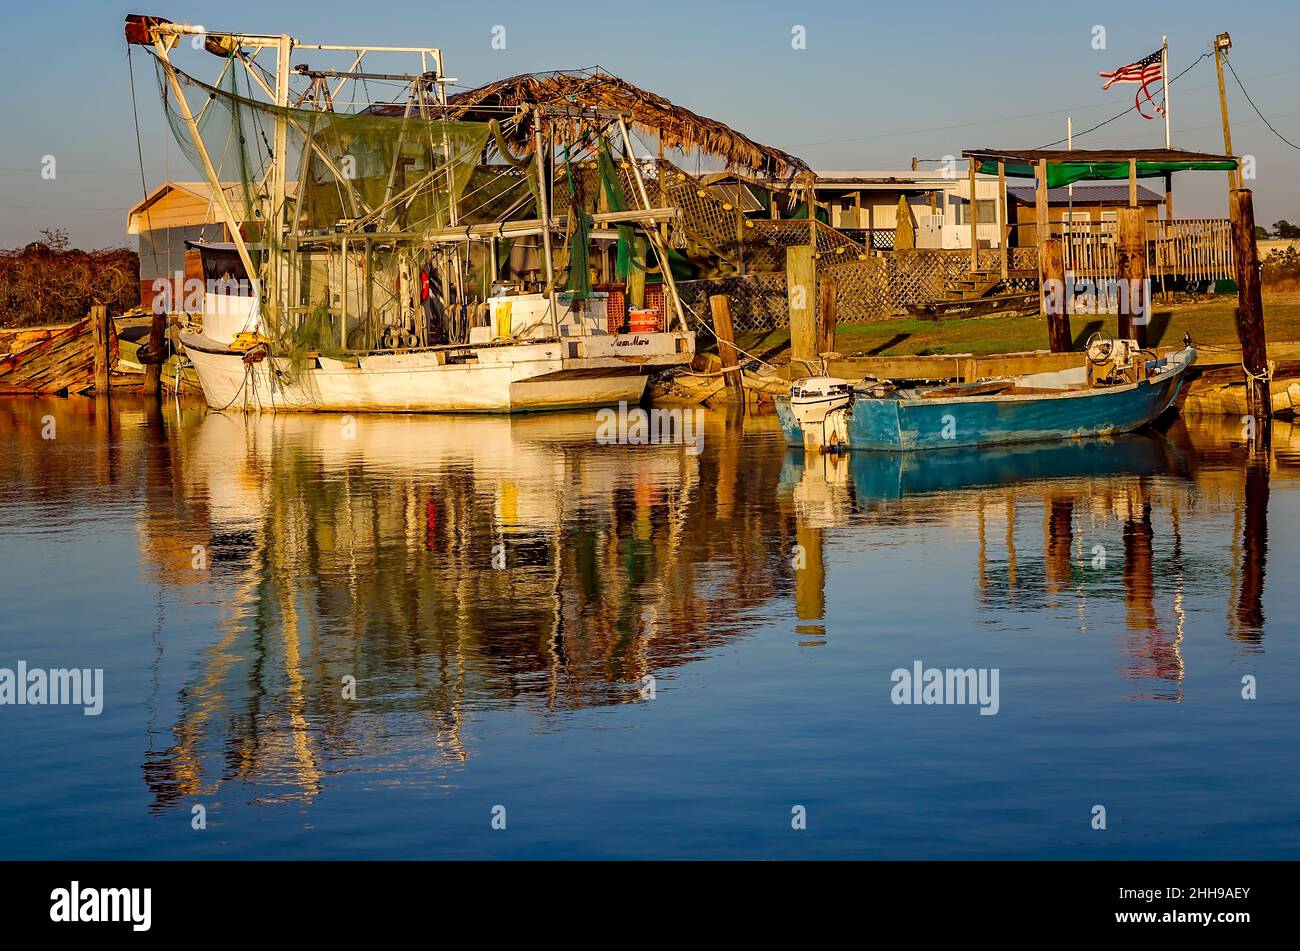 A shrimp boat and oyster skiff are pictured at sunset, Dec. 24, 2016, in Bayou La Batre, Alabama. The city is known as the Seafood Capital of Alabama. Stock Photo